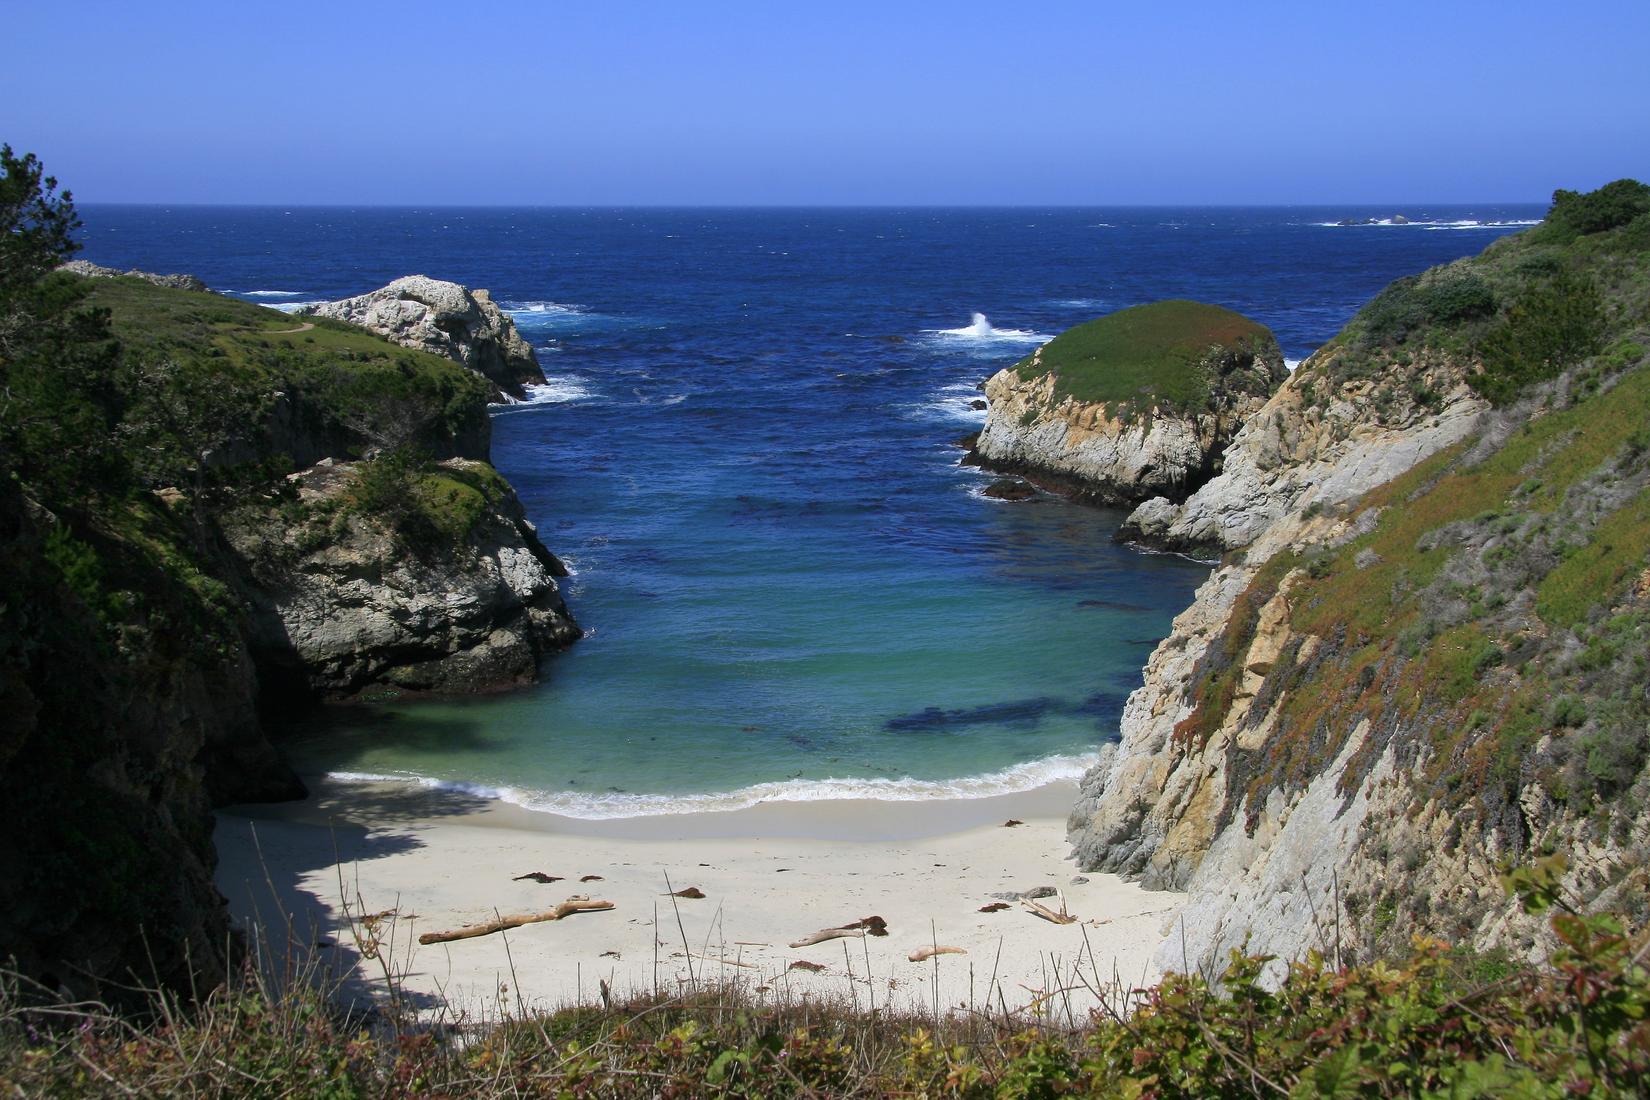 Sandee - Point Lobos State Natural Reserve - Gibson Beach